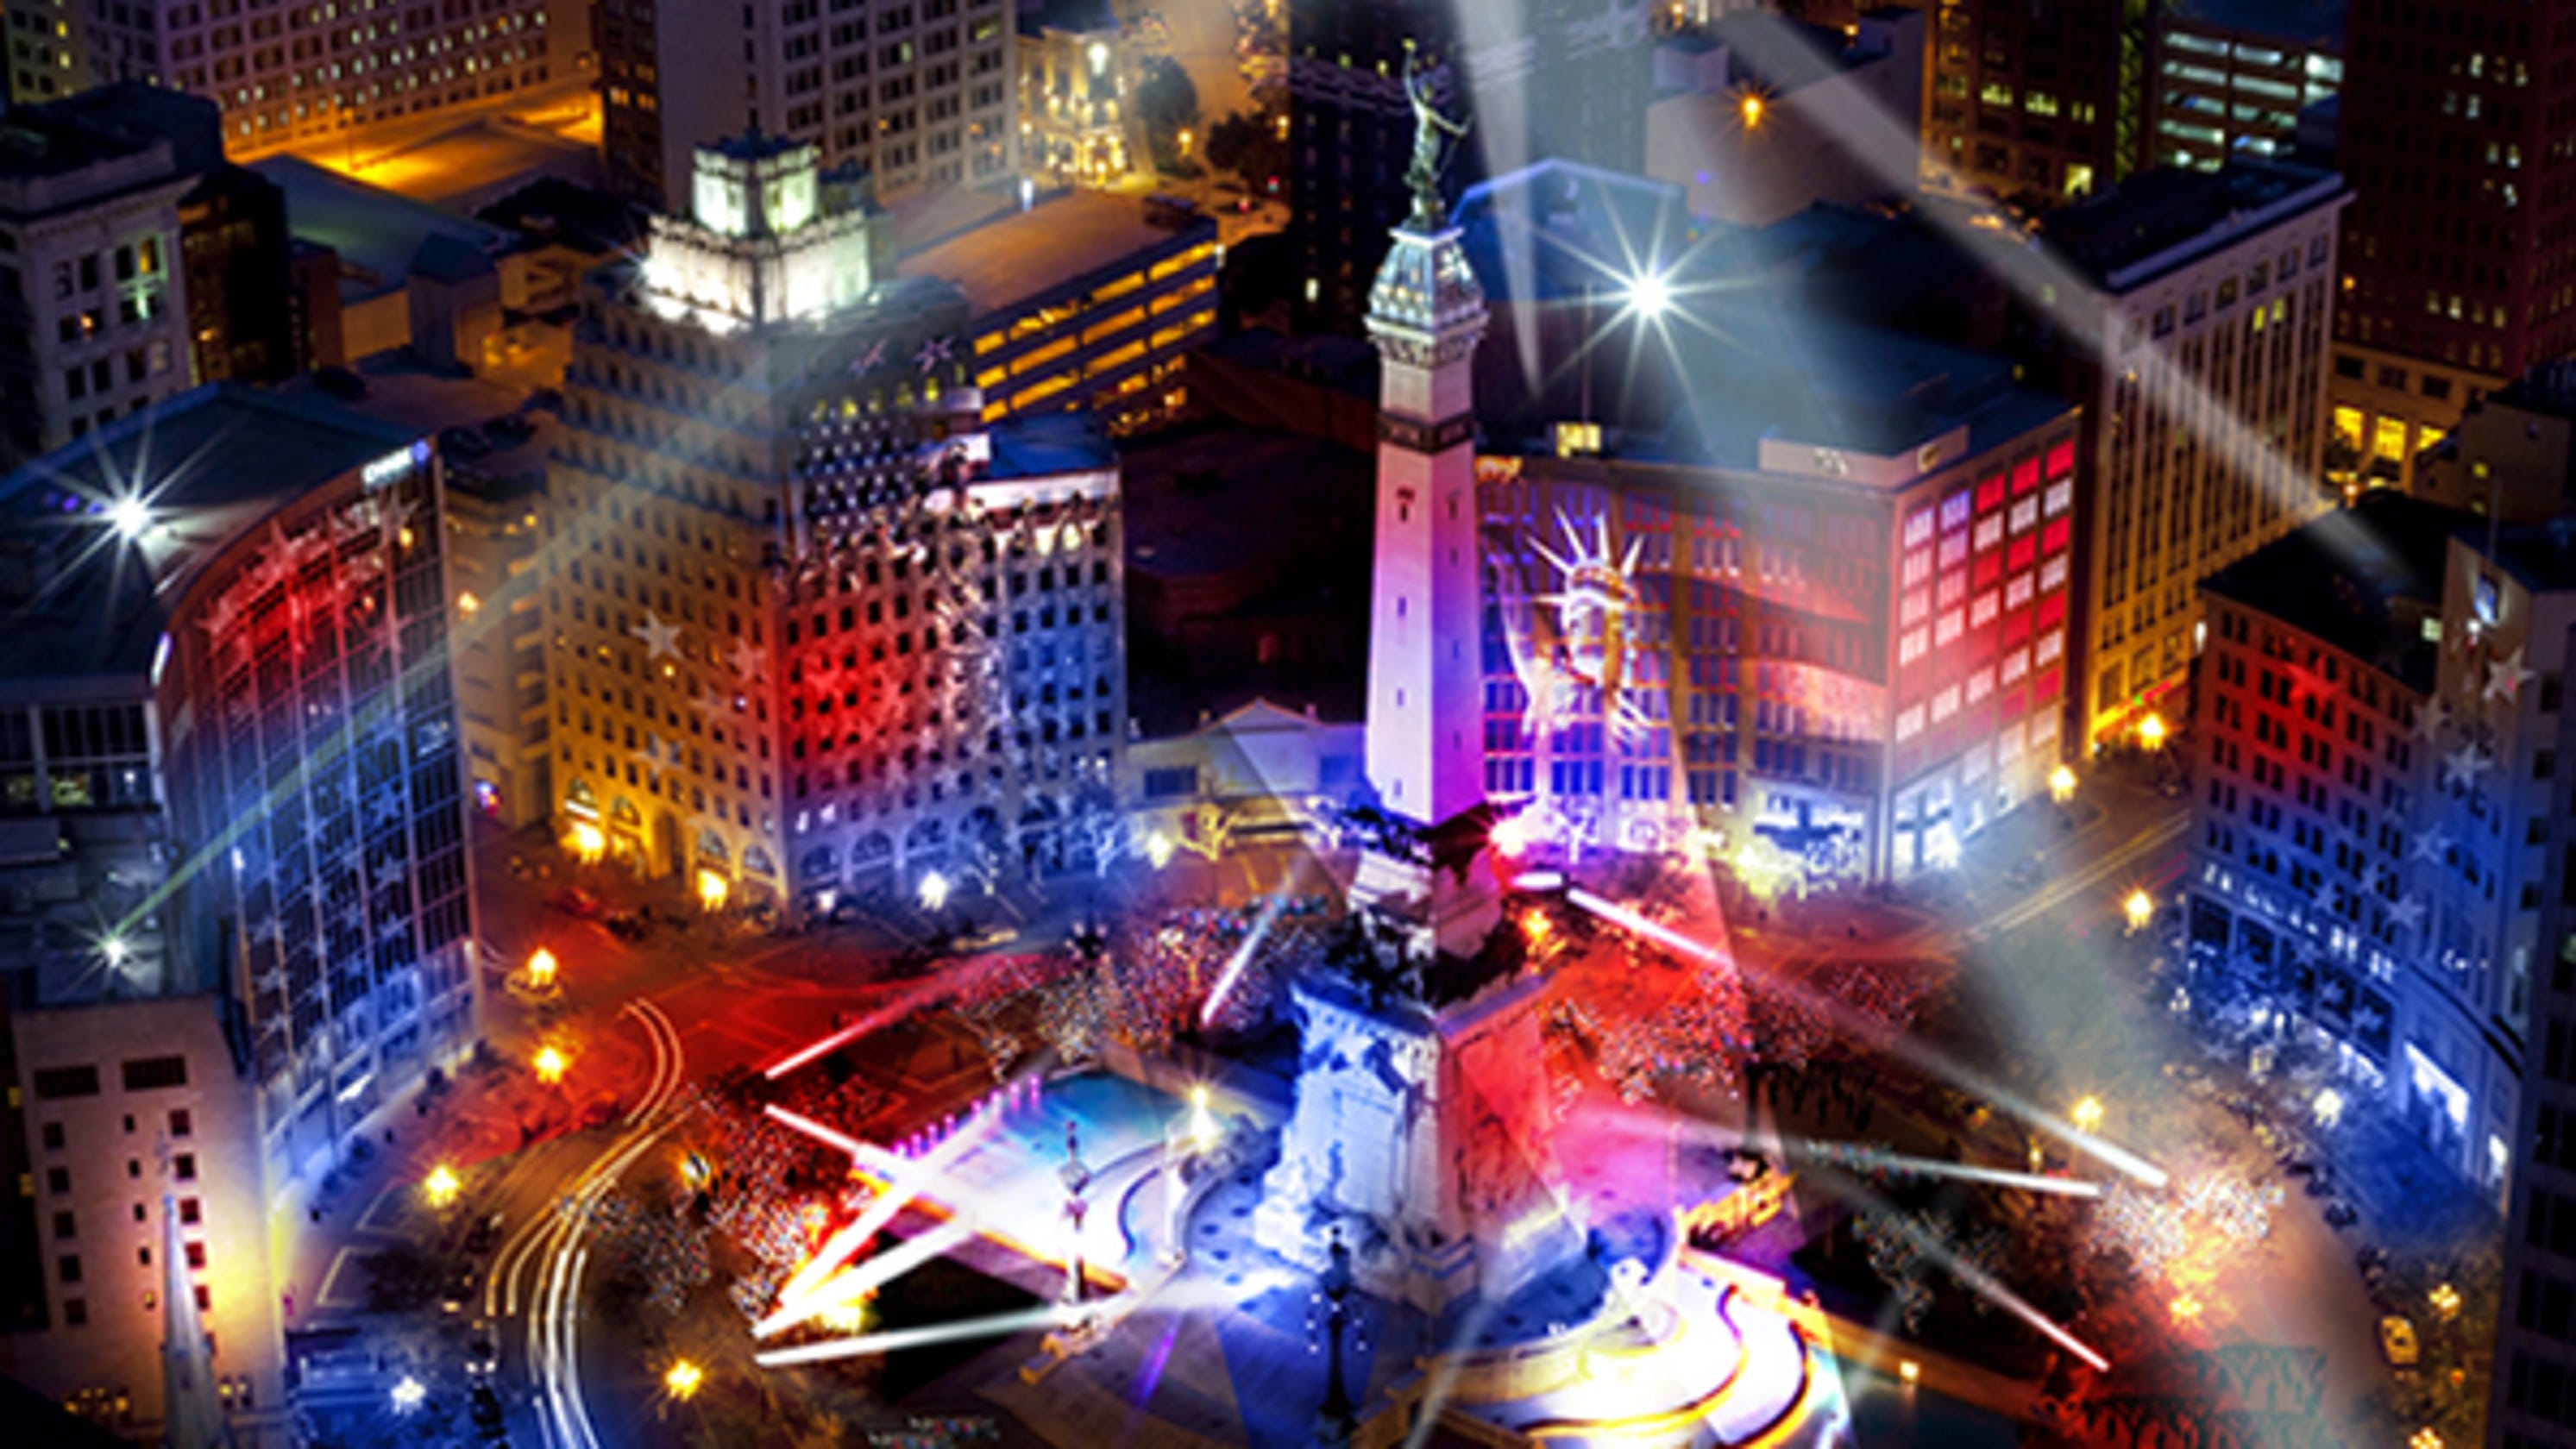 Indianapolis' Monument Circle will soon have big light displays